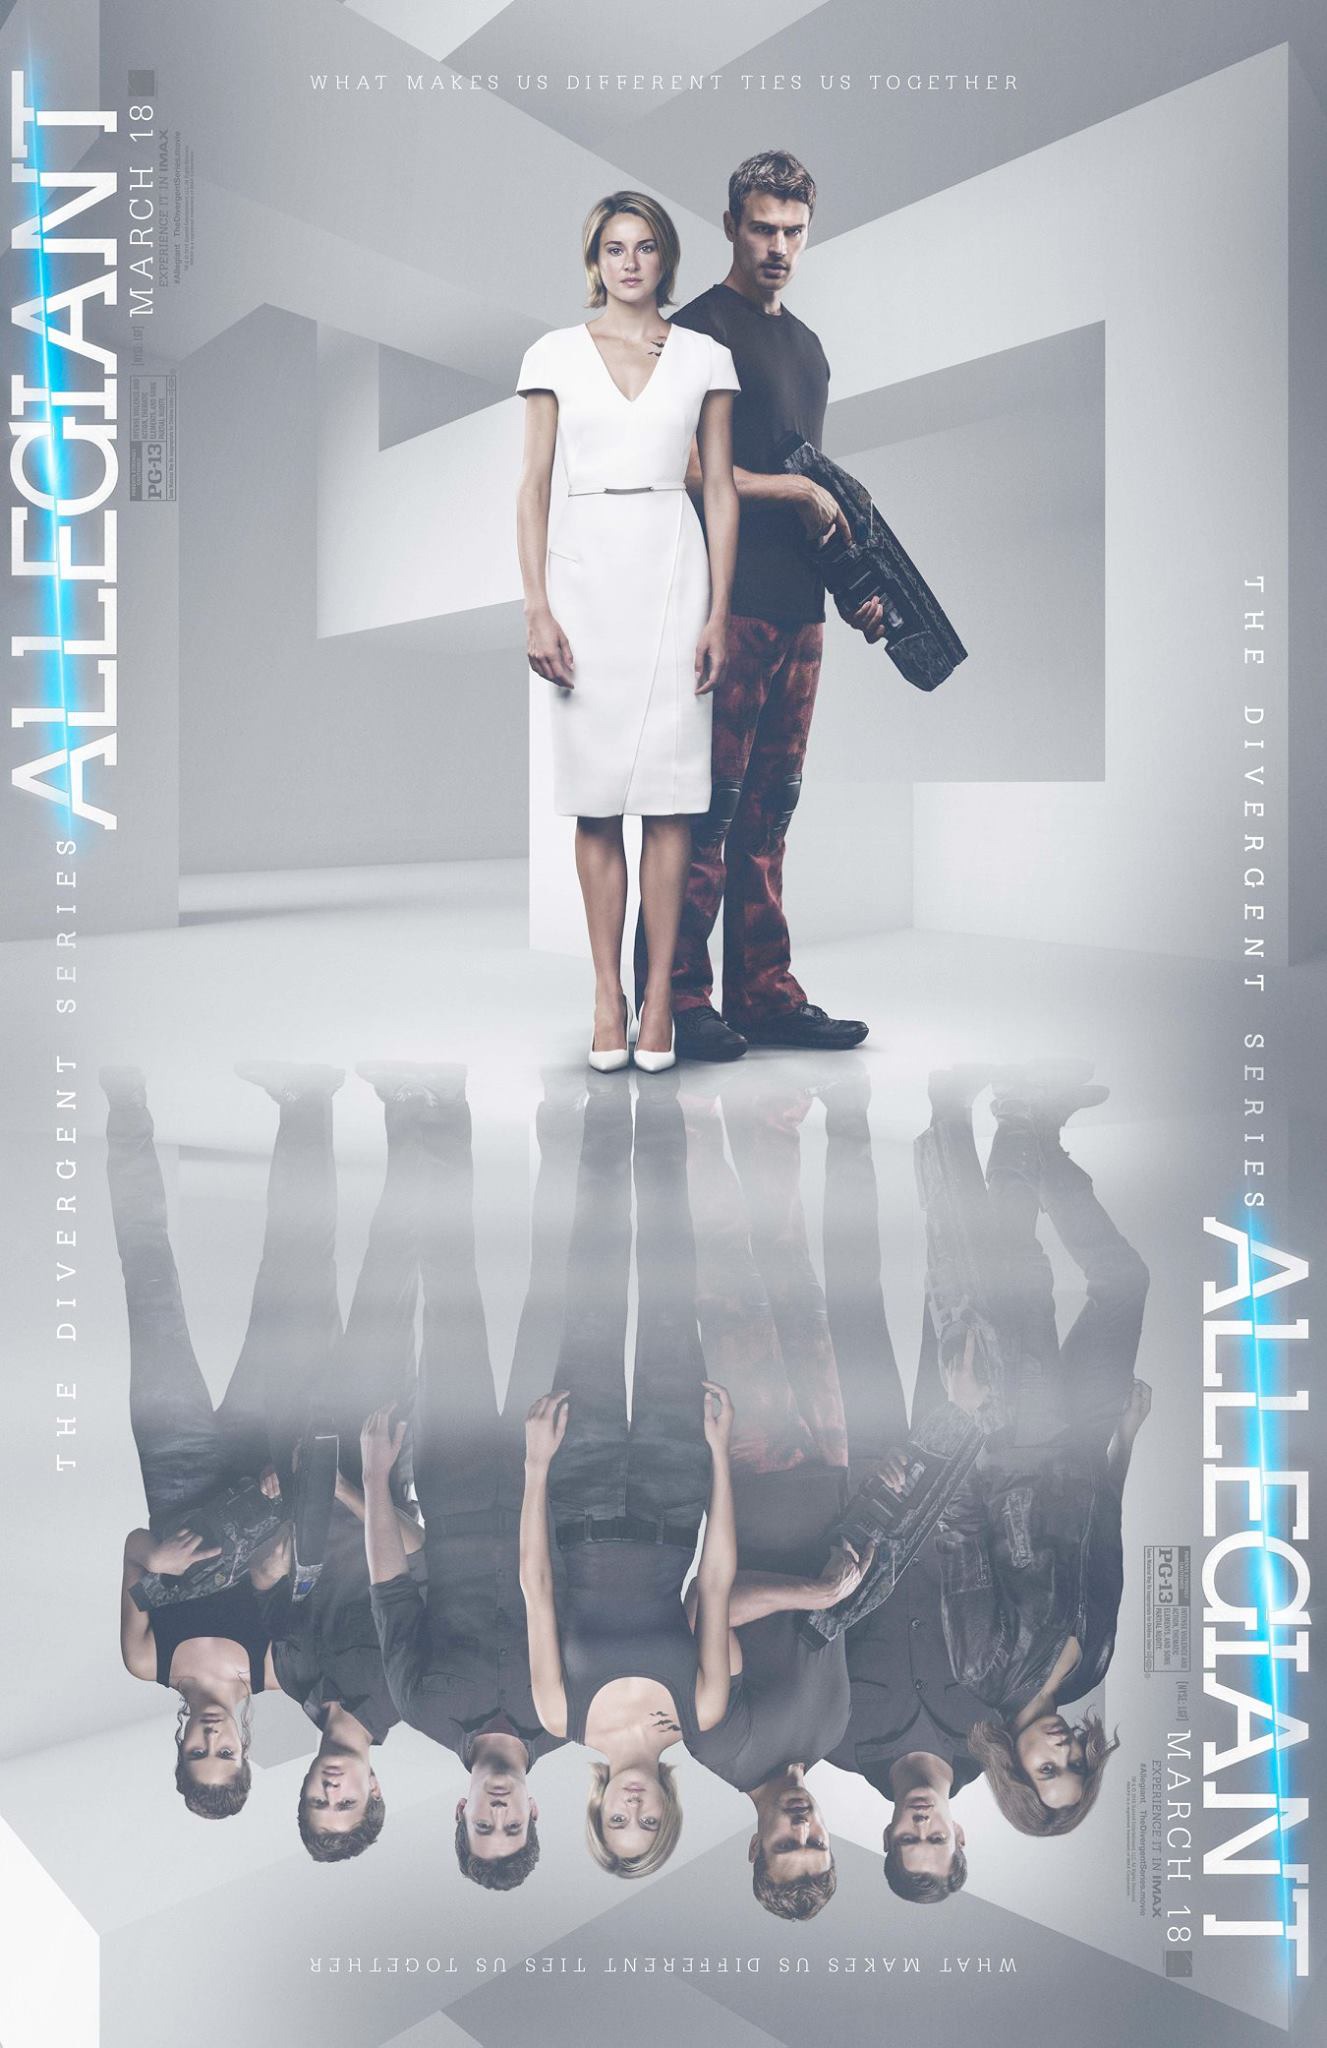 Mega Sized Movie Poster Image for The Divergent Series: Allegiant (#16 of 20)